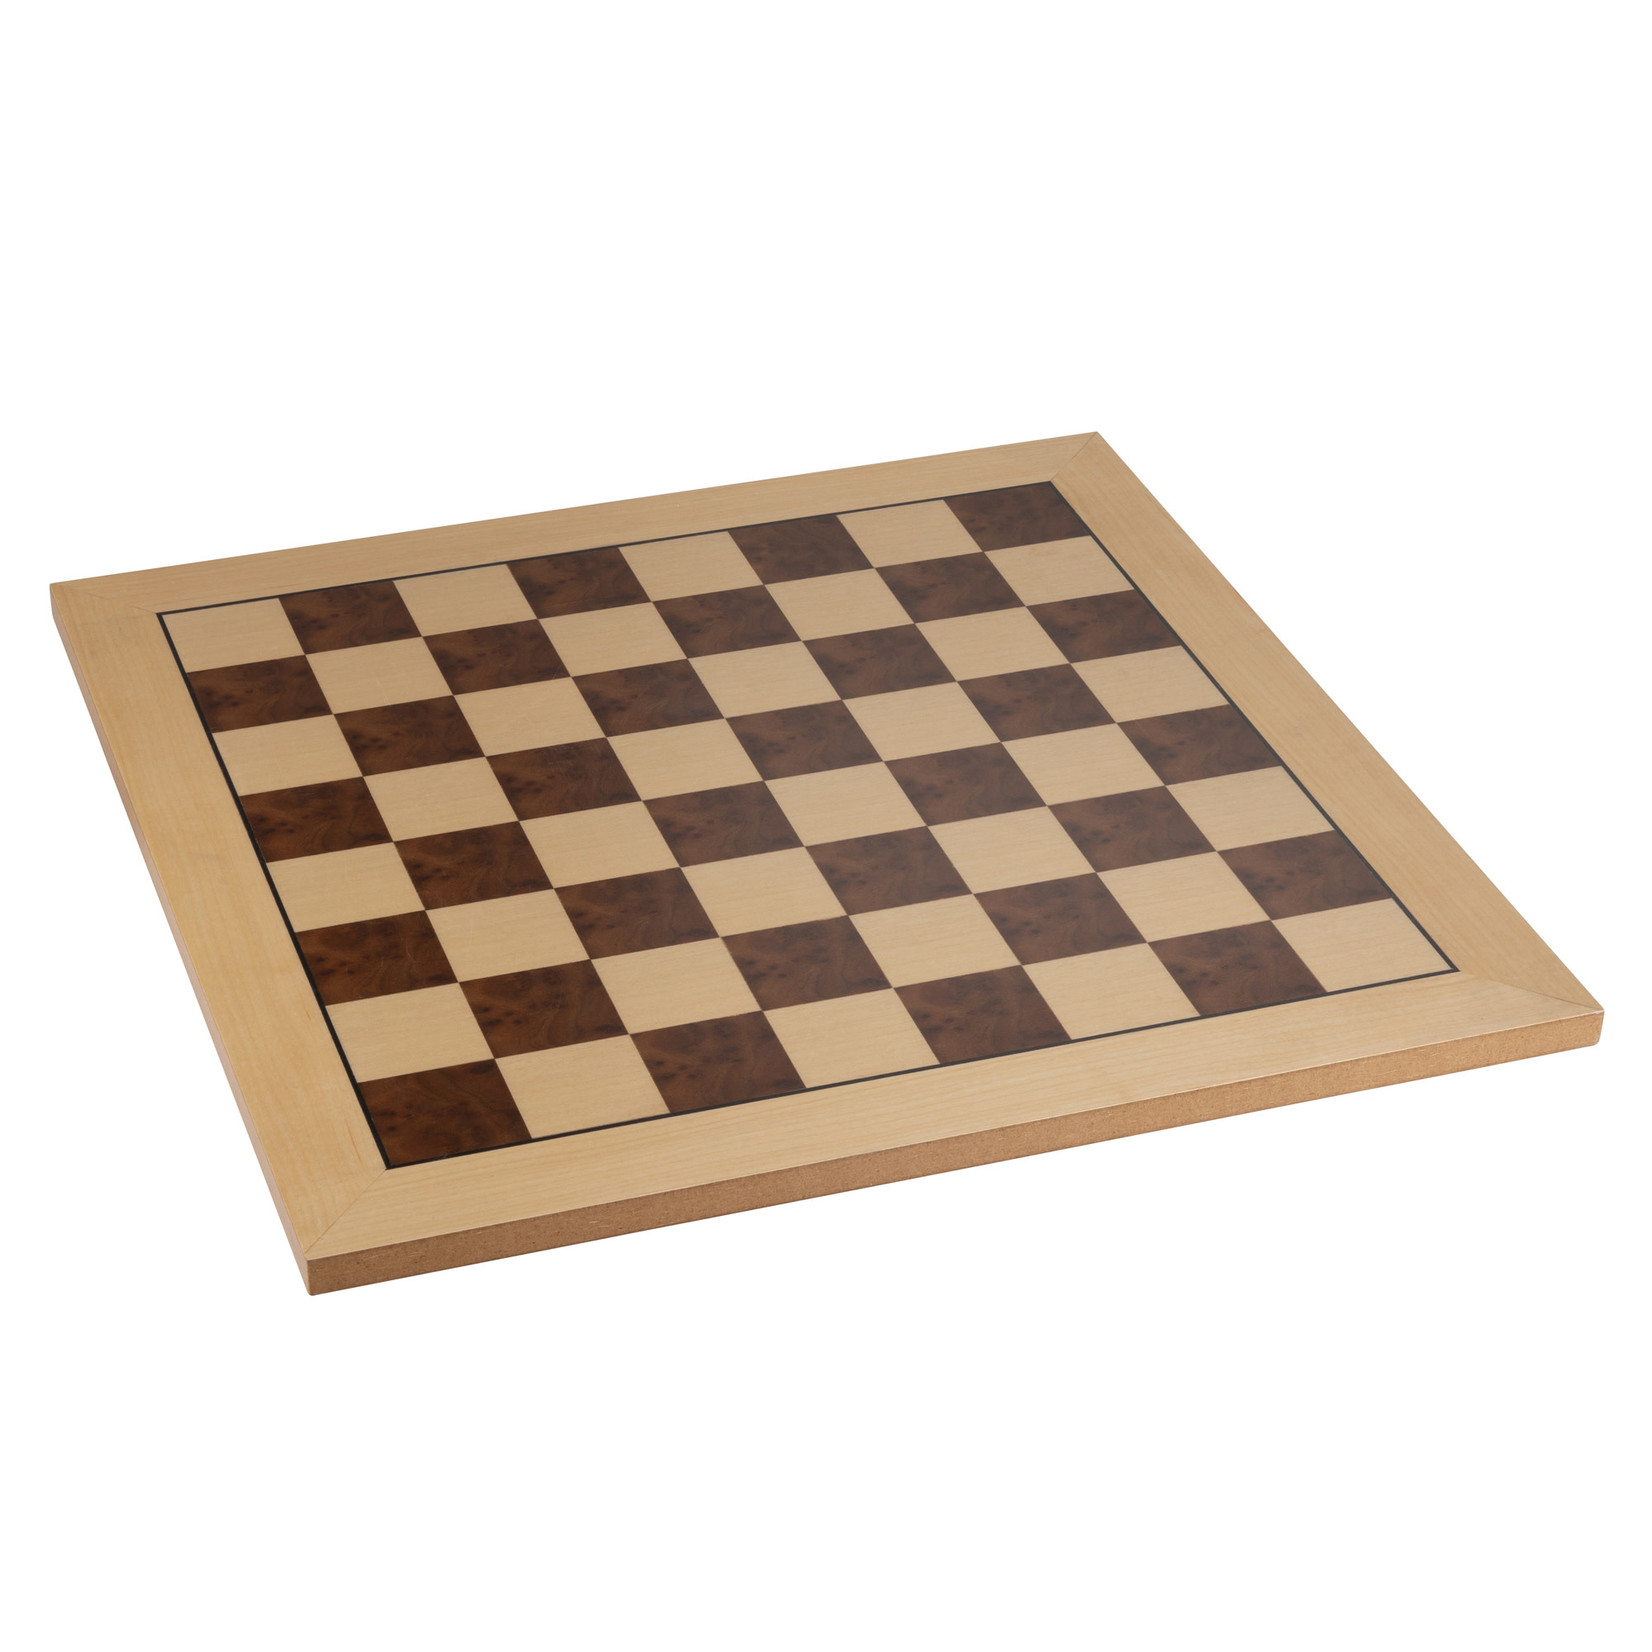 Wood Expressions 19-Inch Chess Board (Camphor & Burl Wood)